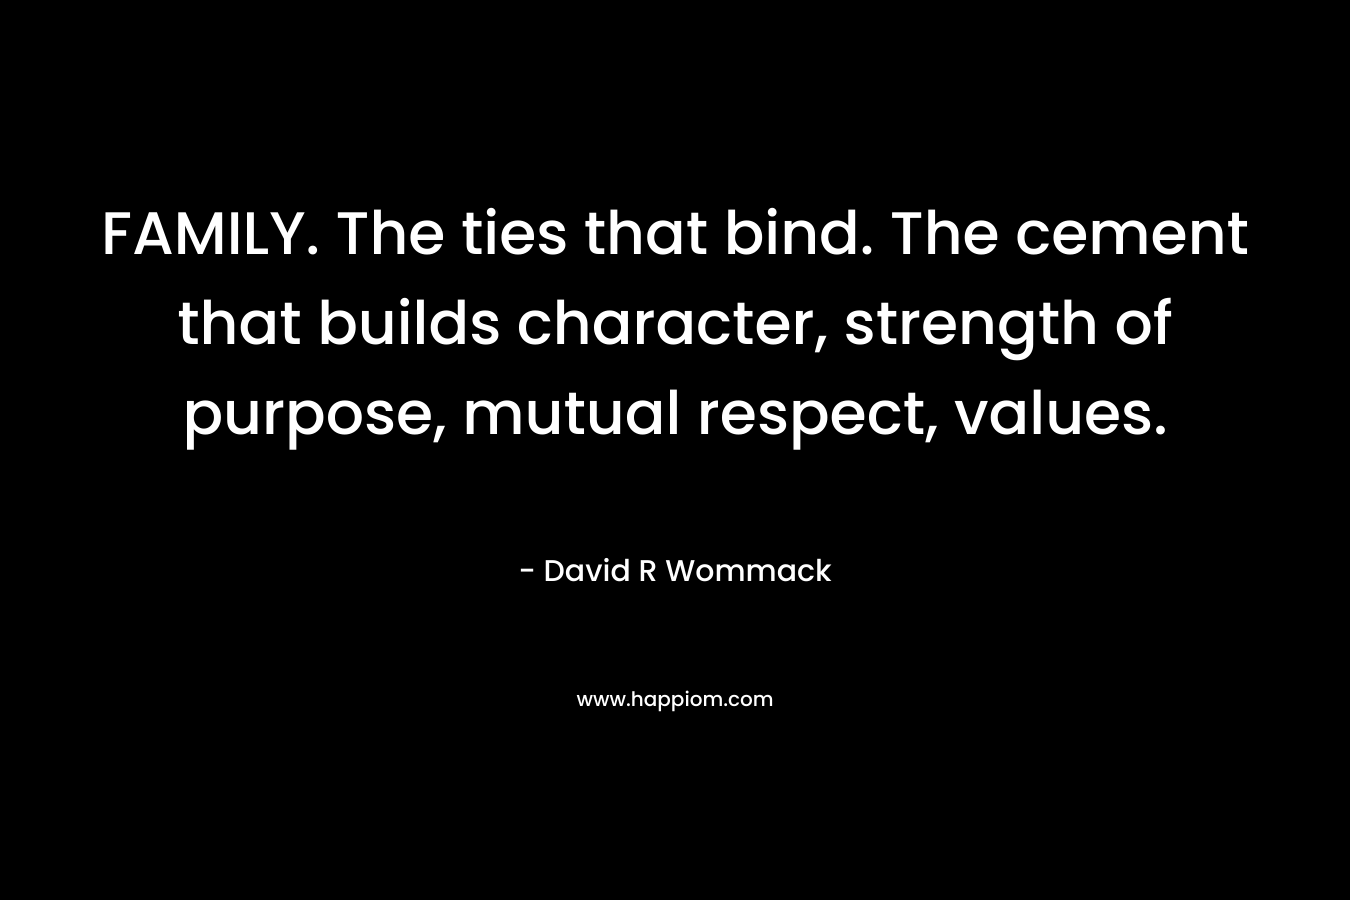 FAMILY. The ties that bind. The cement that builds character, strength of purpose, mutual respect, values. – David R Wommack